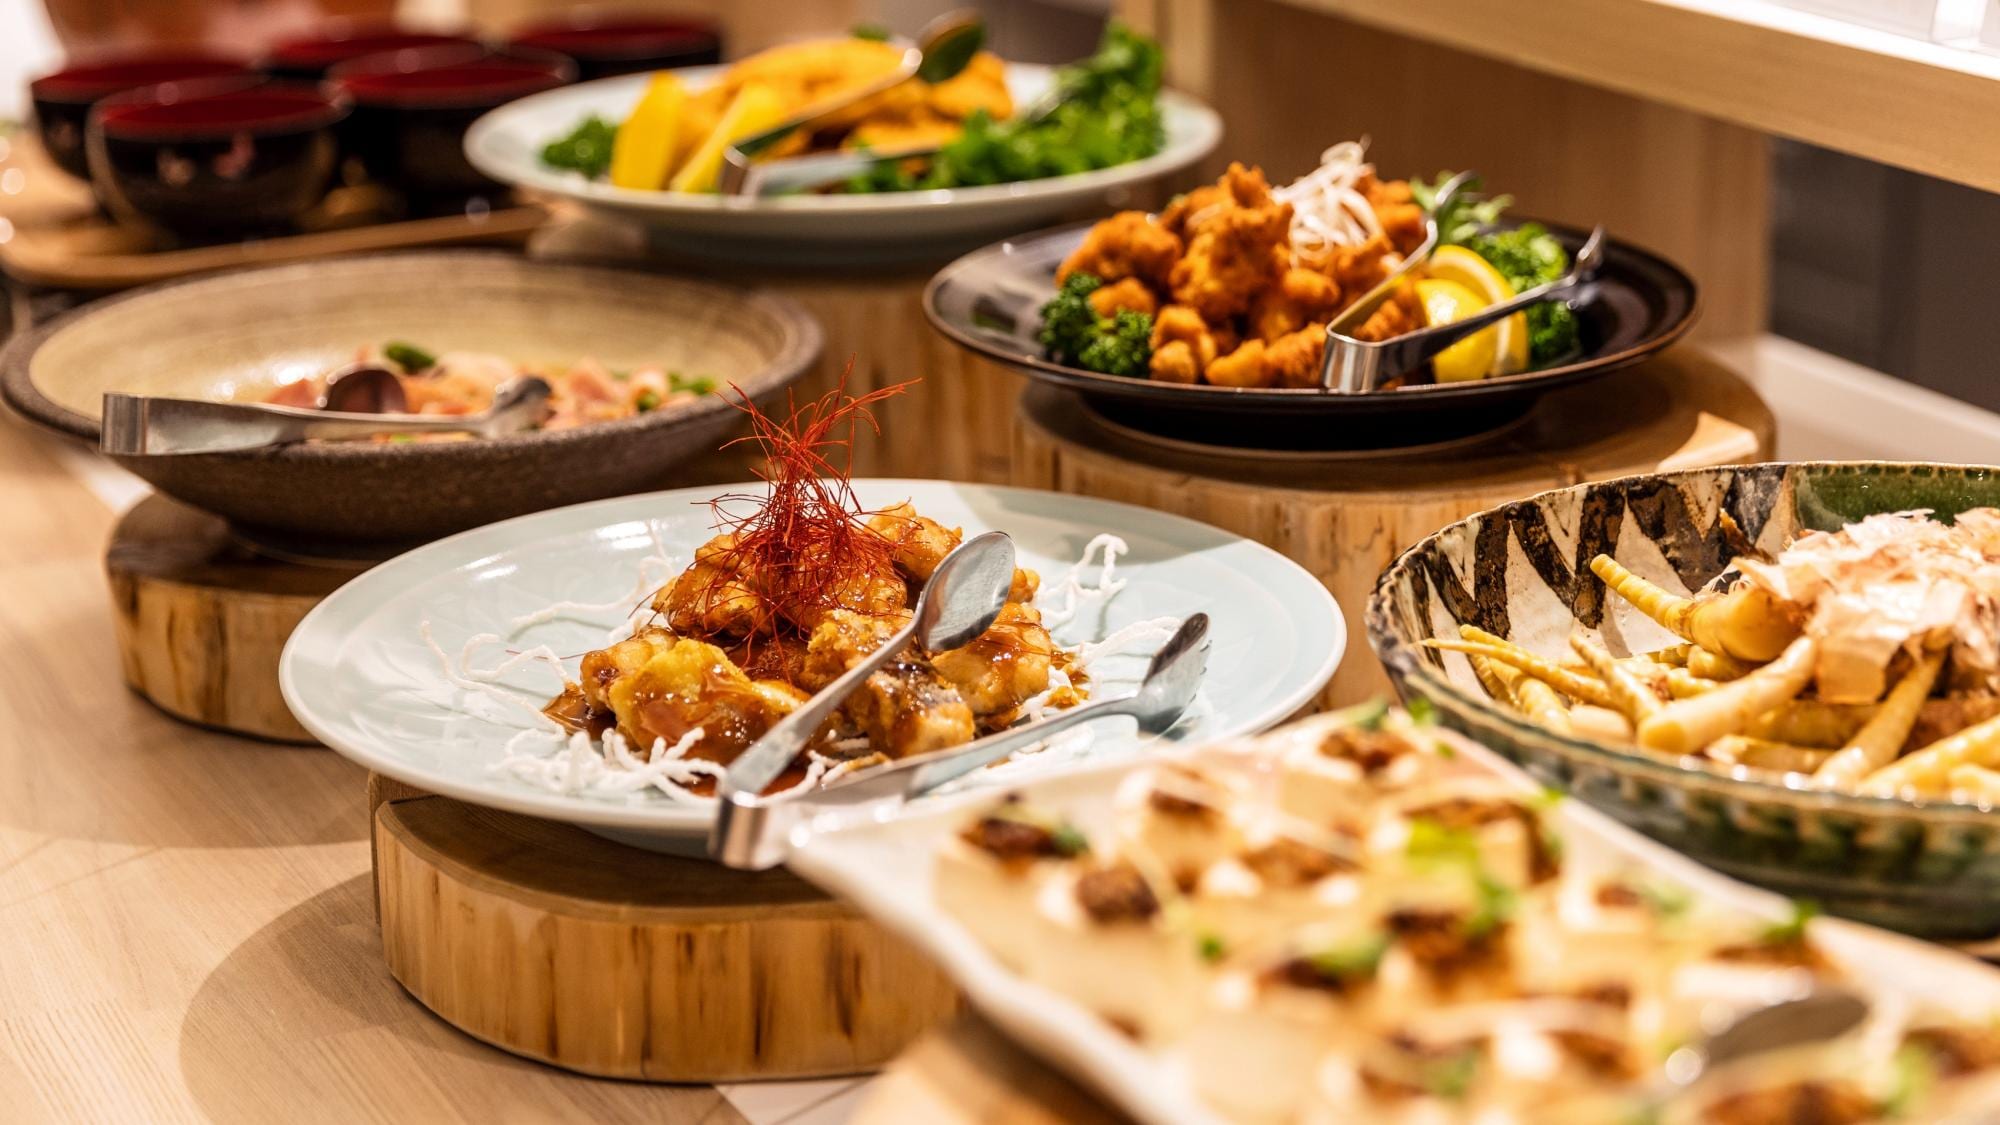 At the buffet venue, you can eat all-you-can-eat standard menus and local dishes!